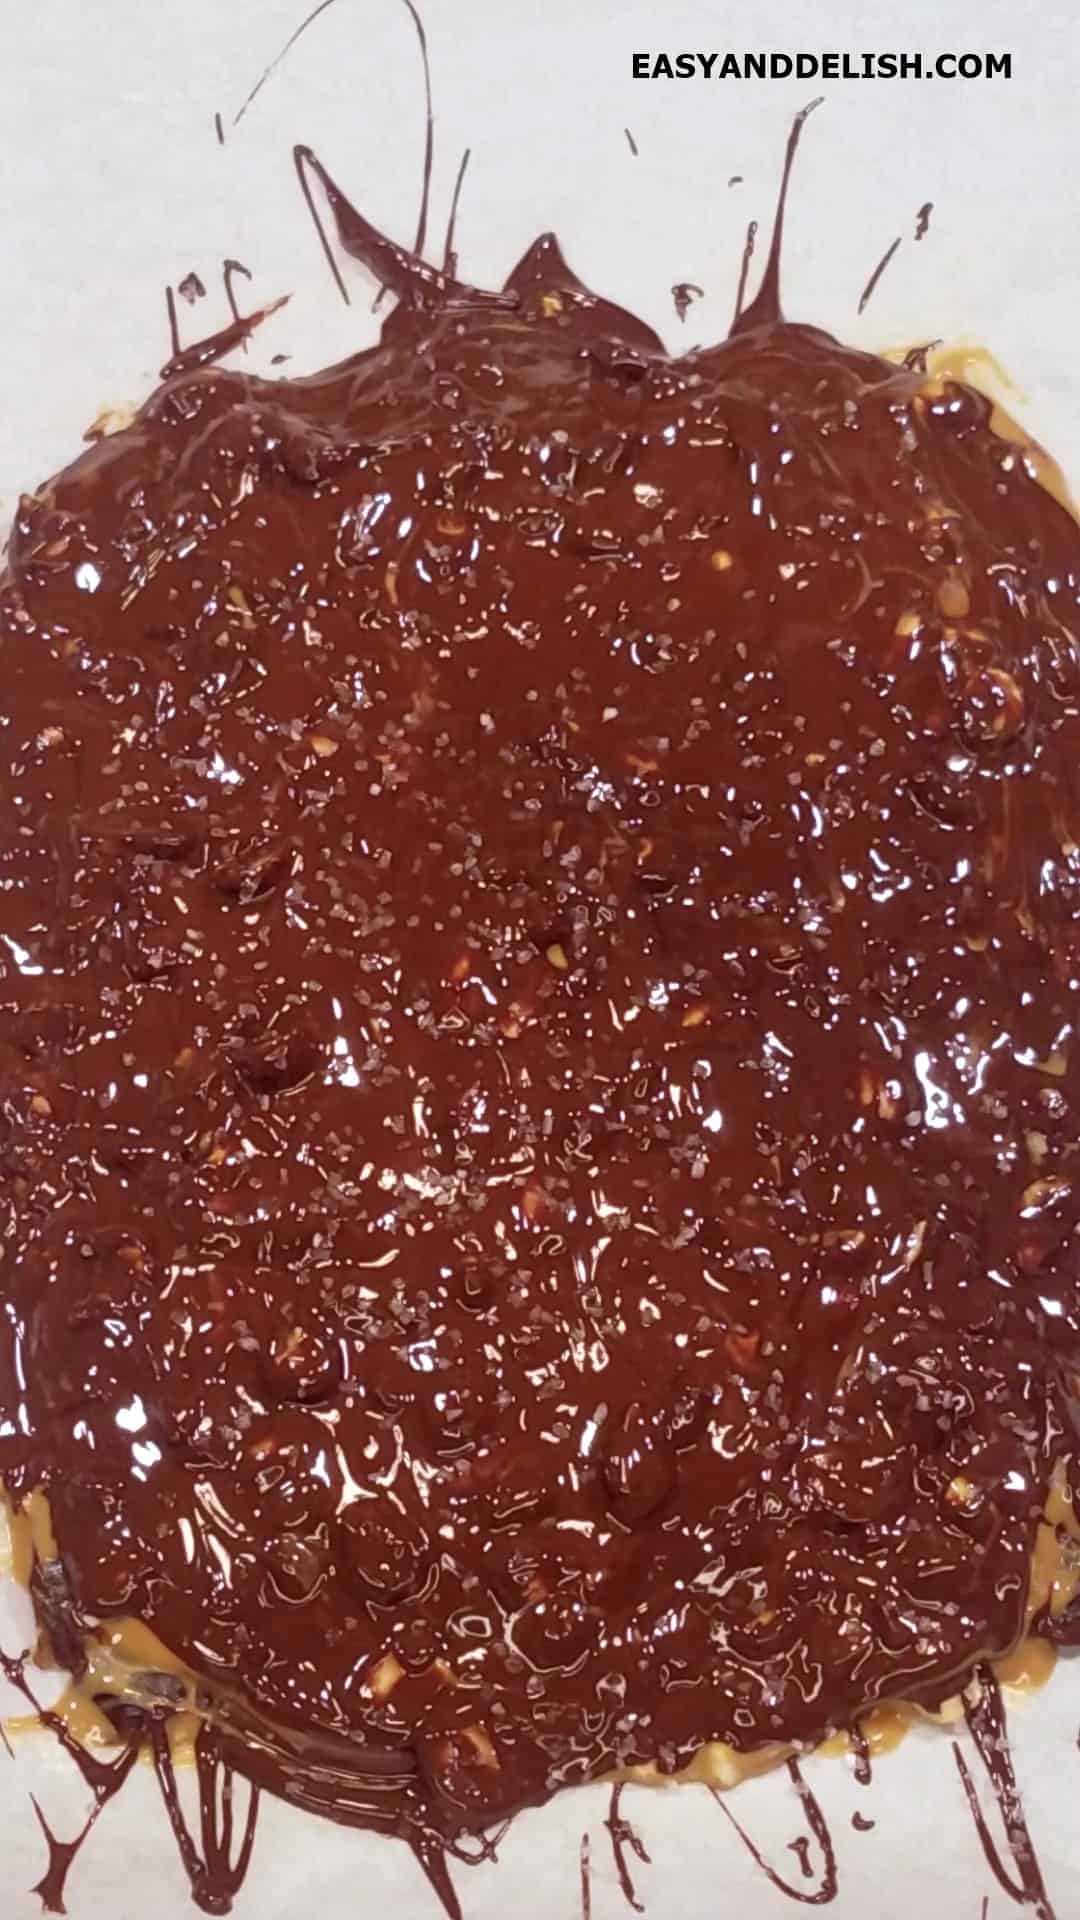 A layer of melted chocolate placed on top of chopped nuts. 